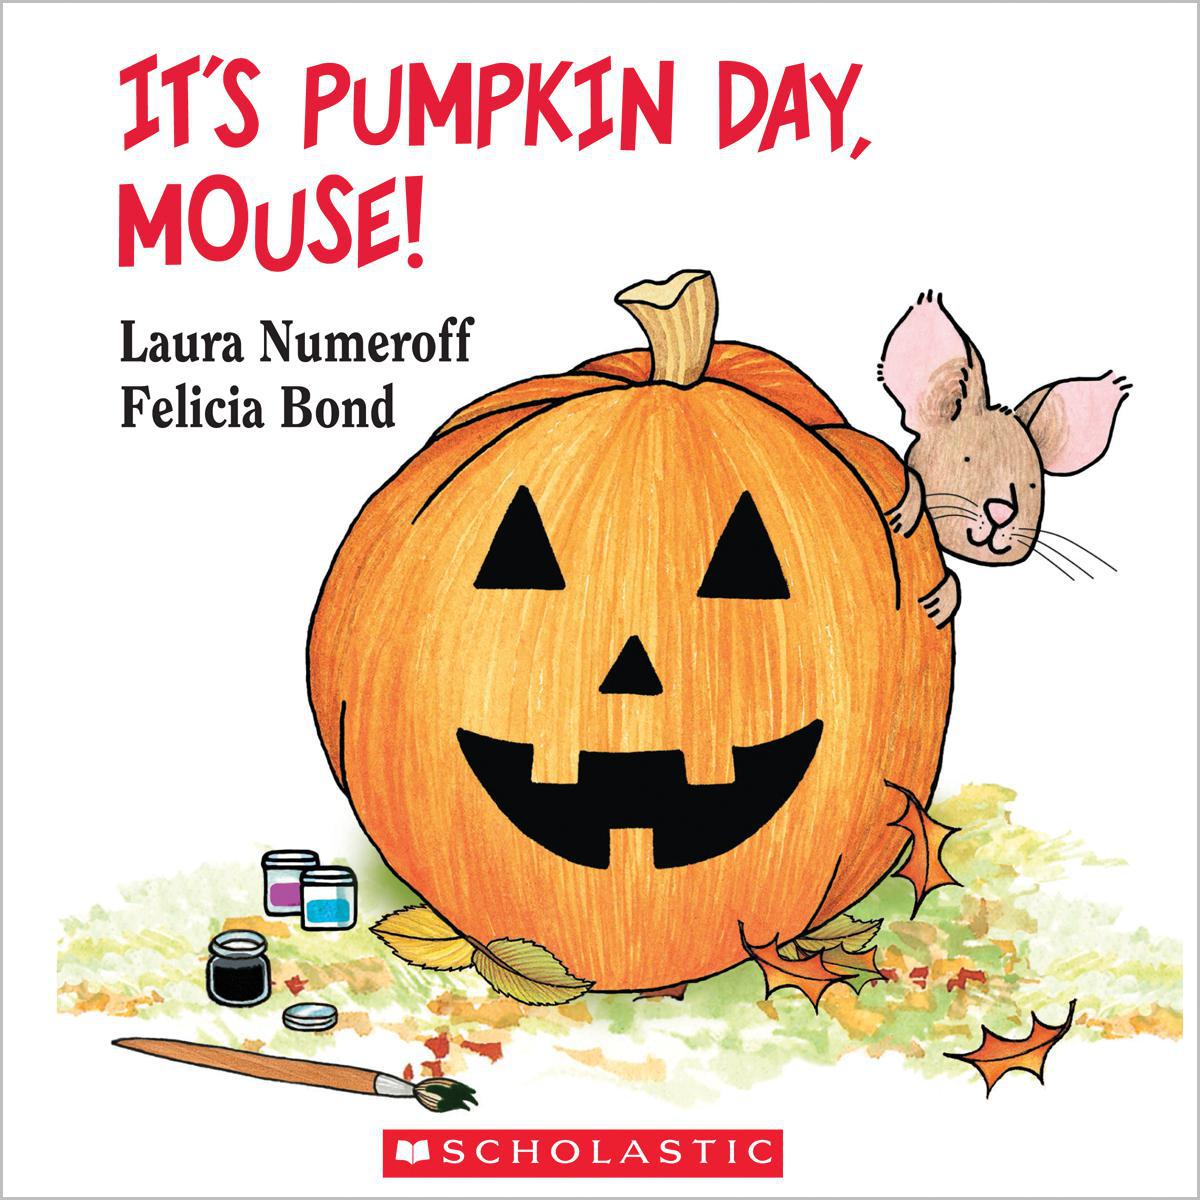  It's Pumpkin Day, Mouse! 